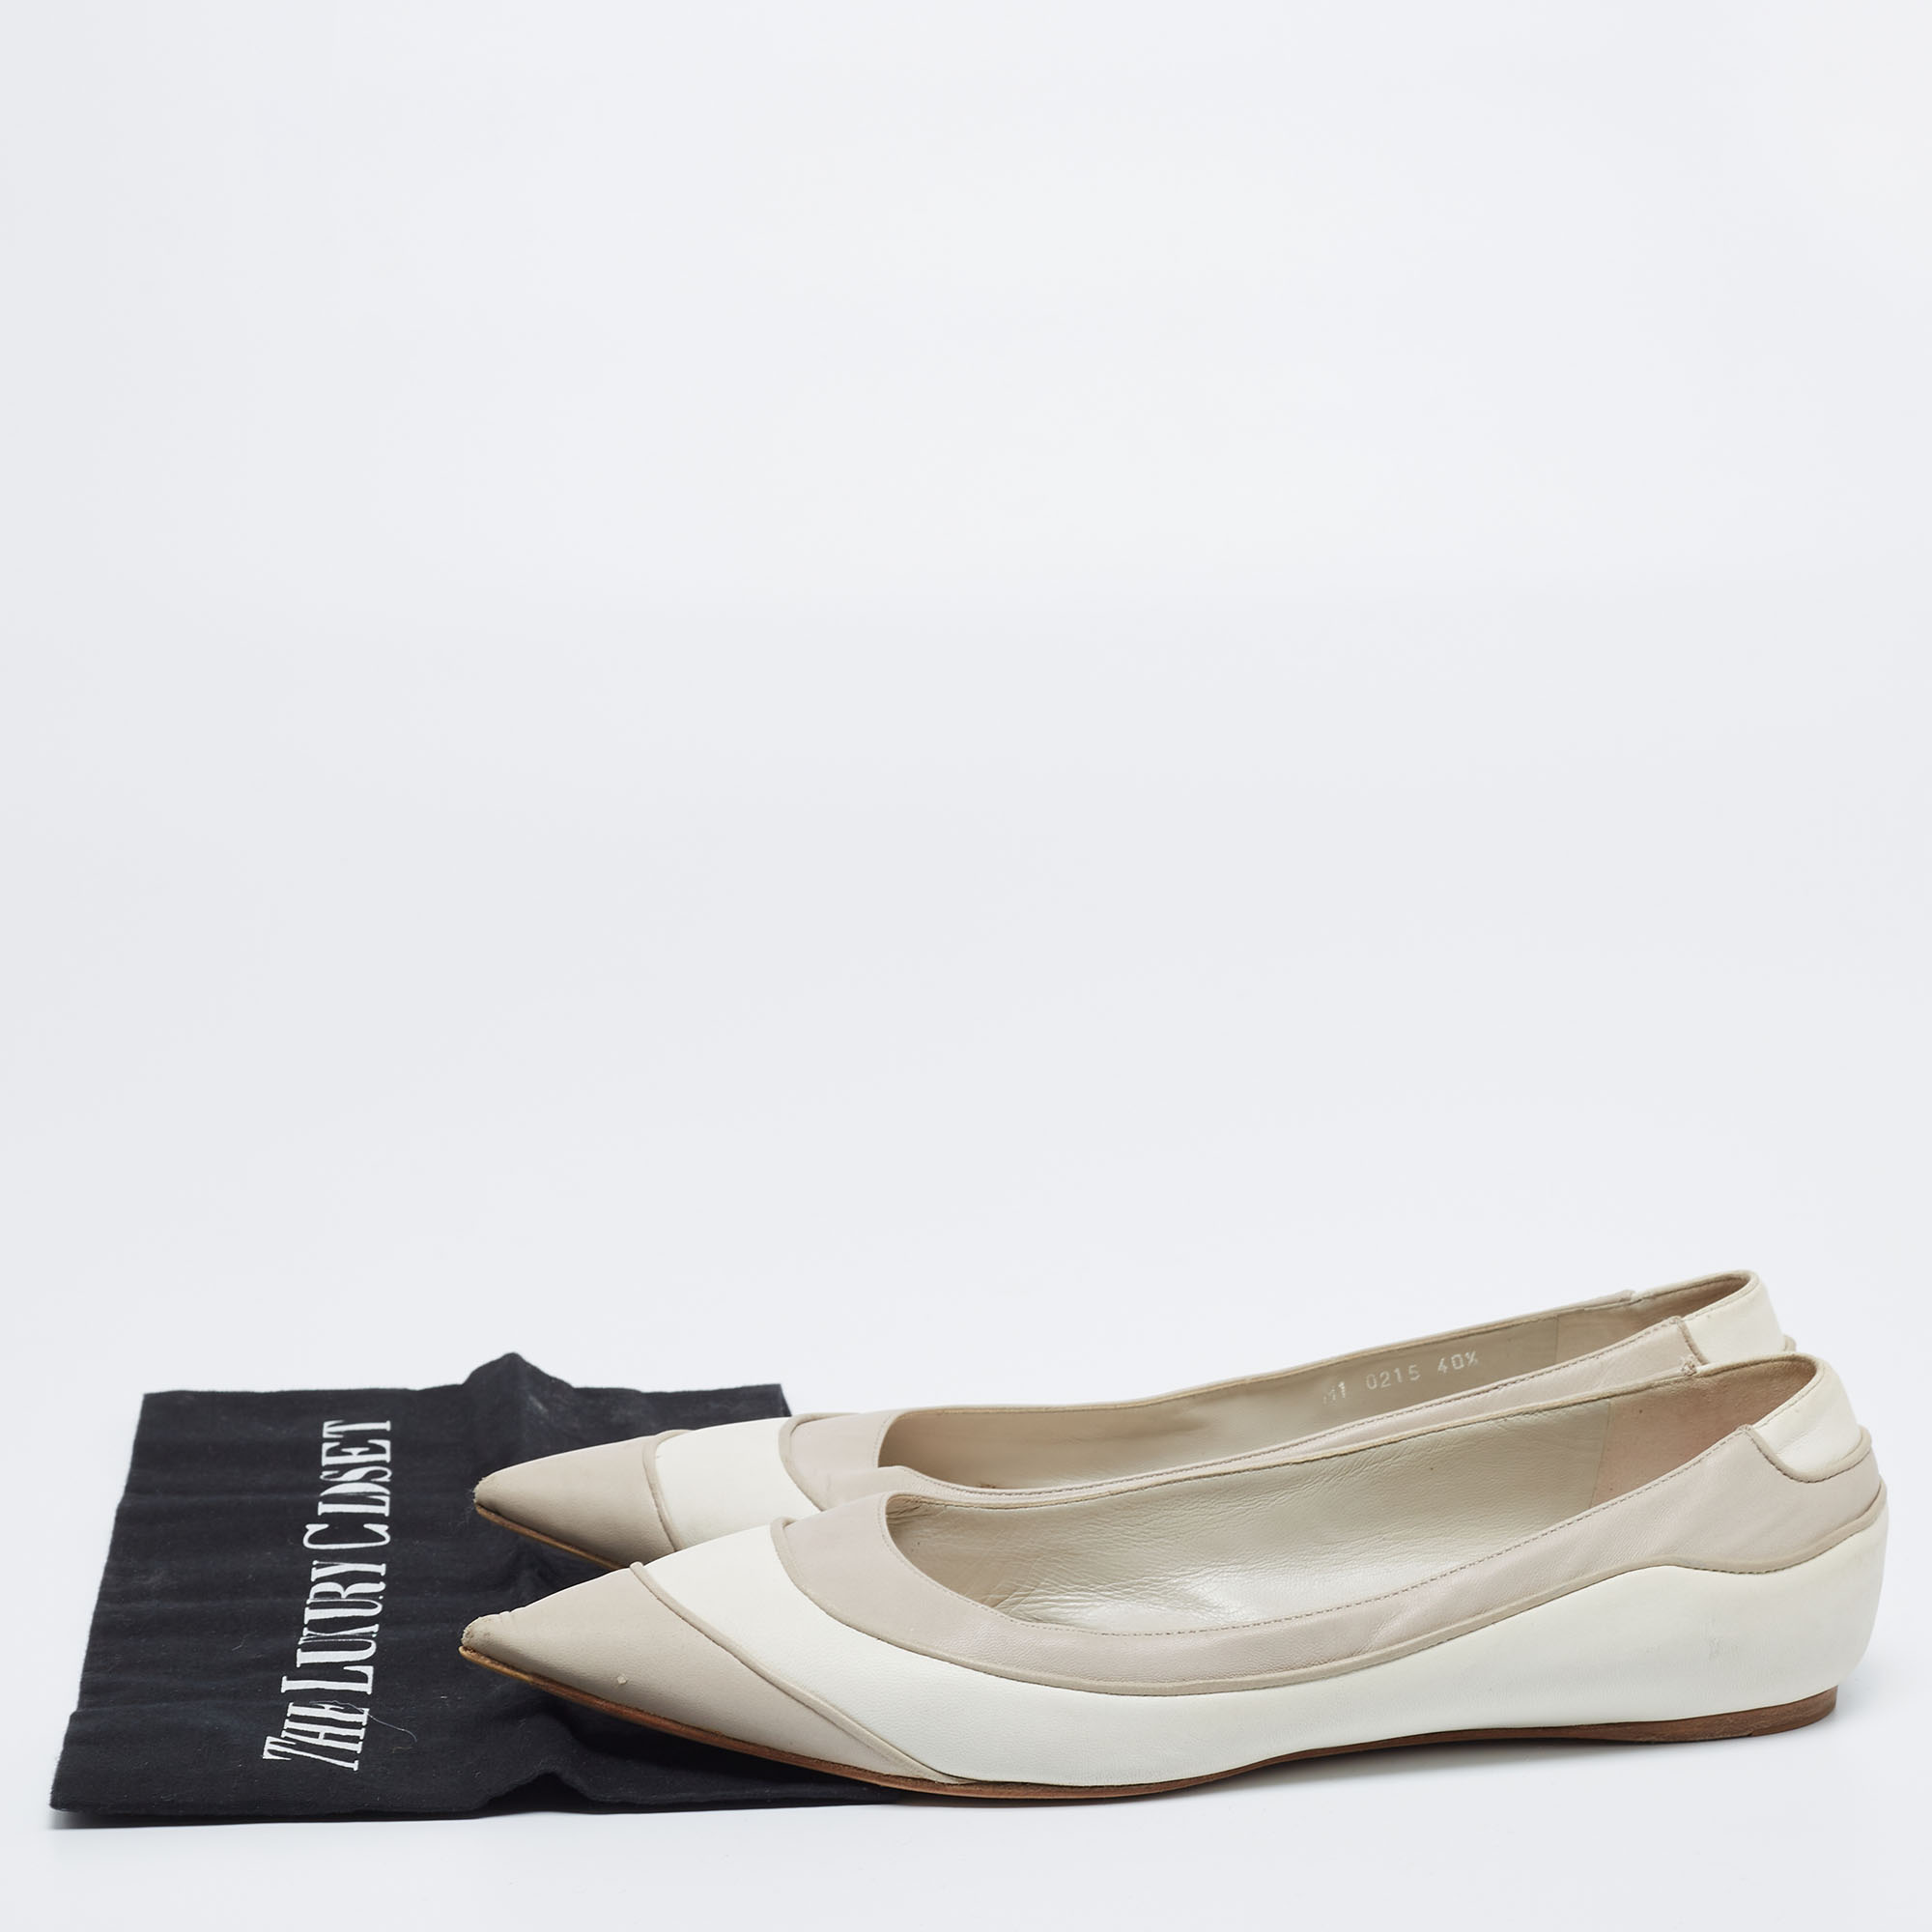 Dior Off-White/Light Grey Leather Pointed Toe Ballet Flats Size 40.5